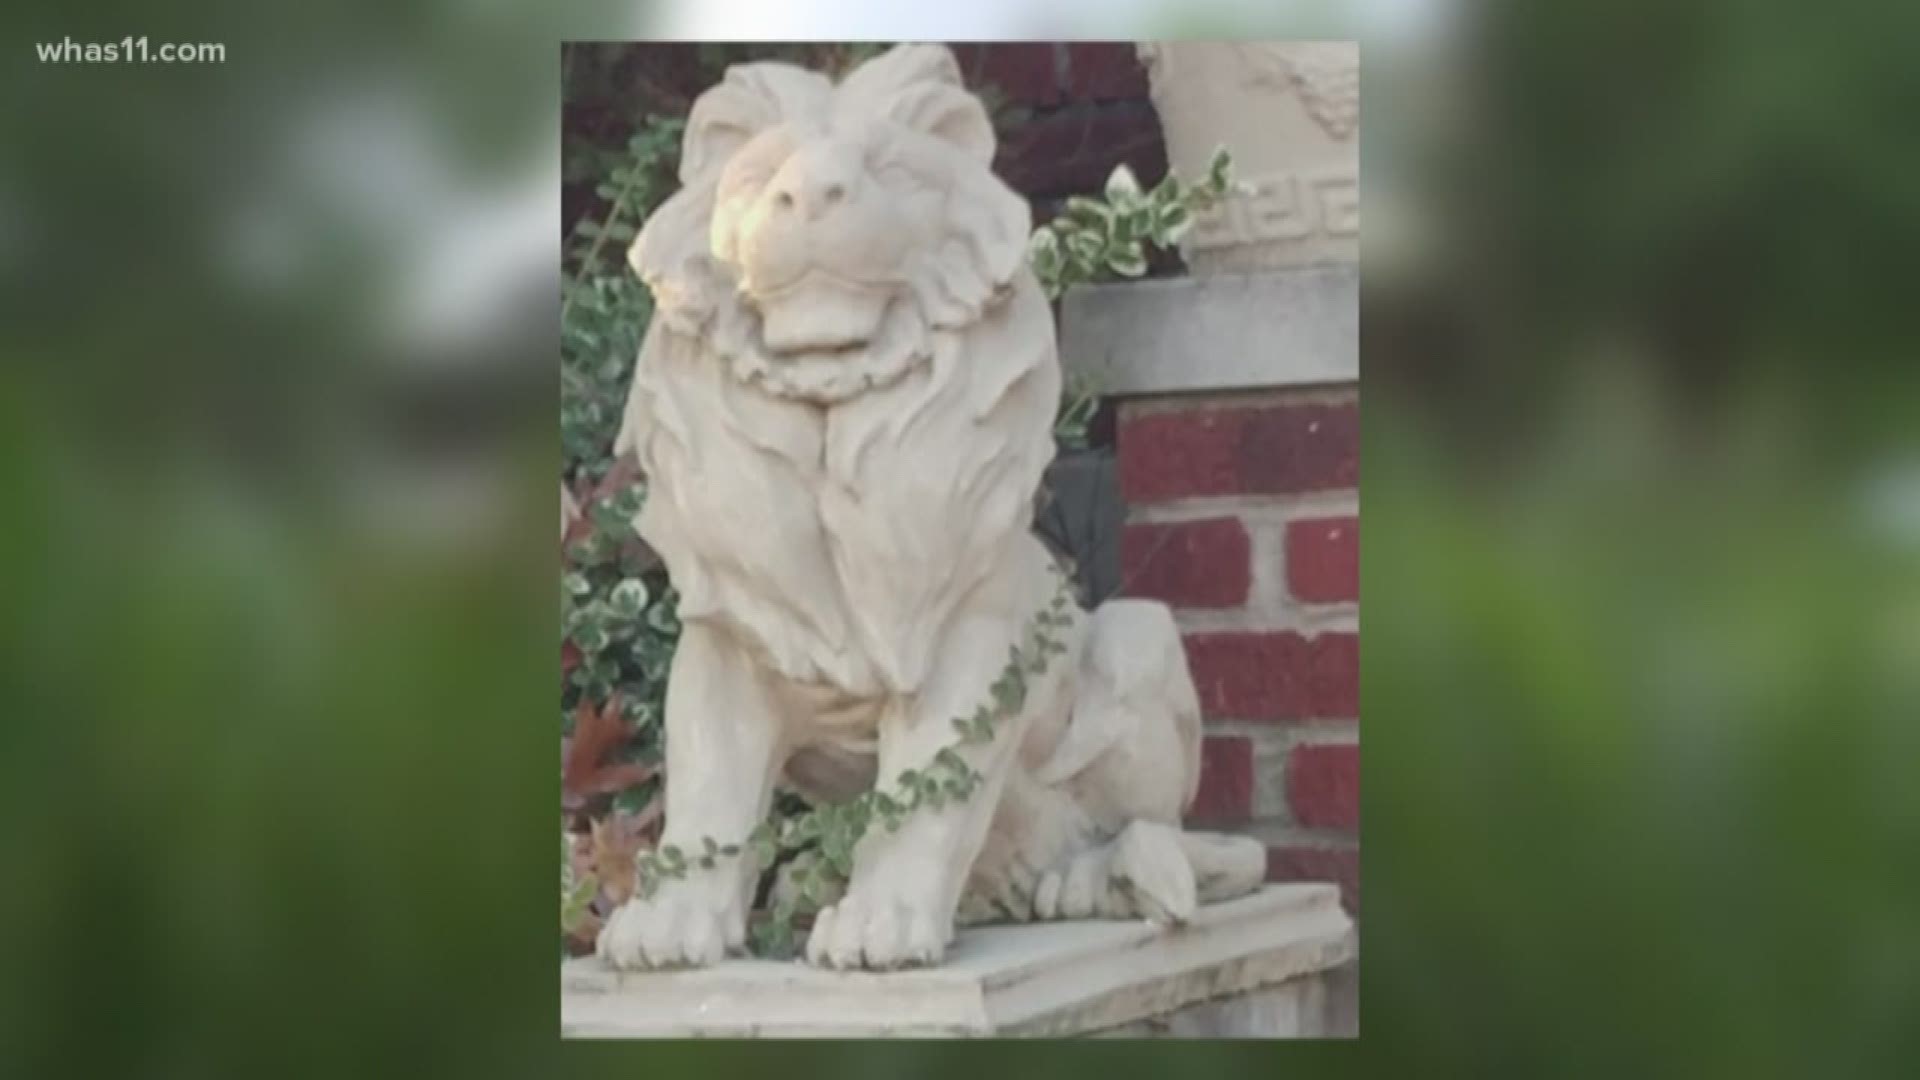 LMPD is searching for whoever stole two 110-pound concrete lions that have 'sentimental value' from a home in Louisville.